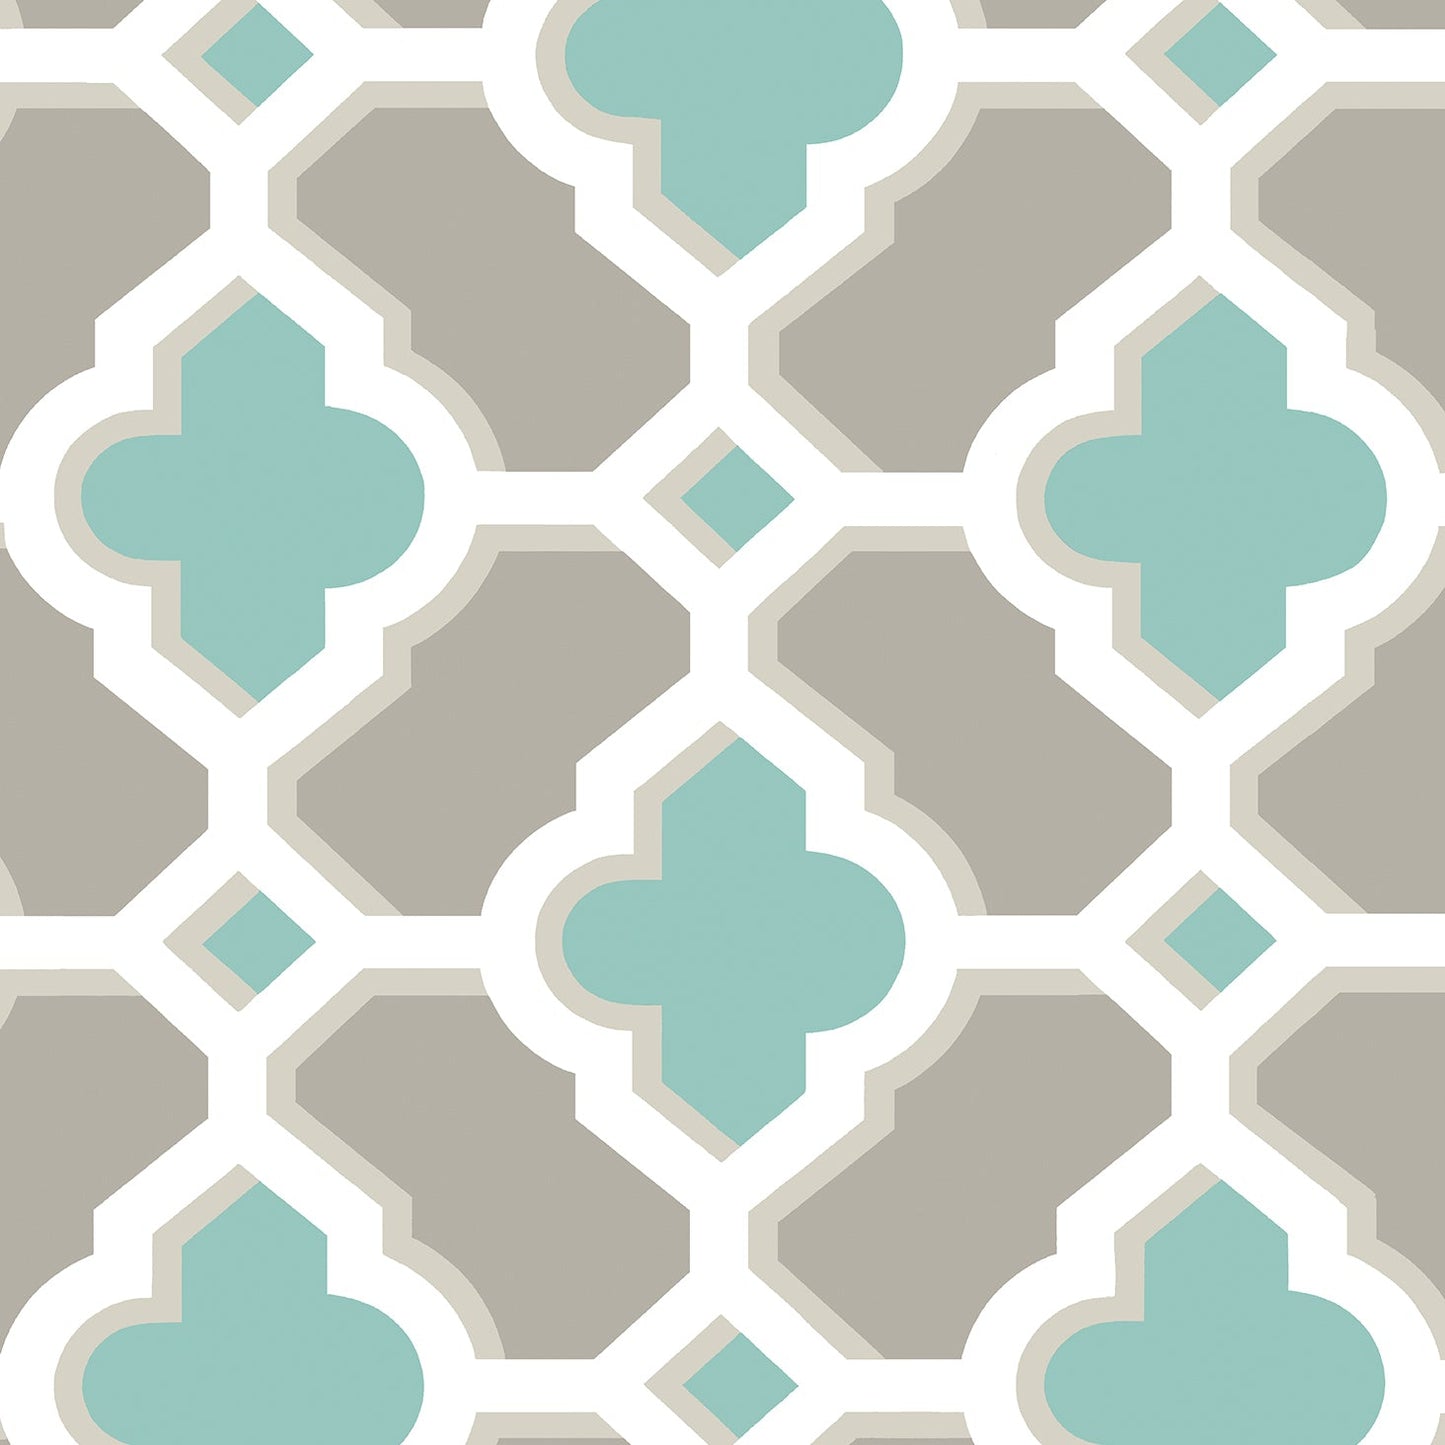 Acquire 2744-24123 Solstice Turquoise Geometric A-Street Prints Wallpaper